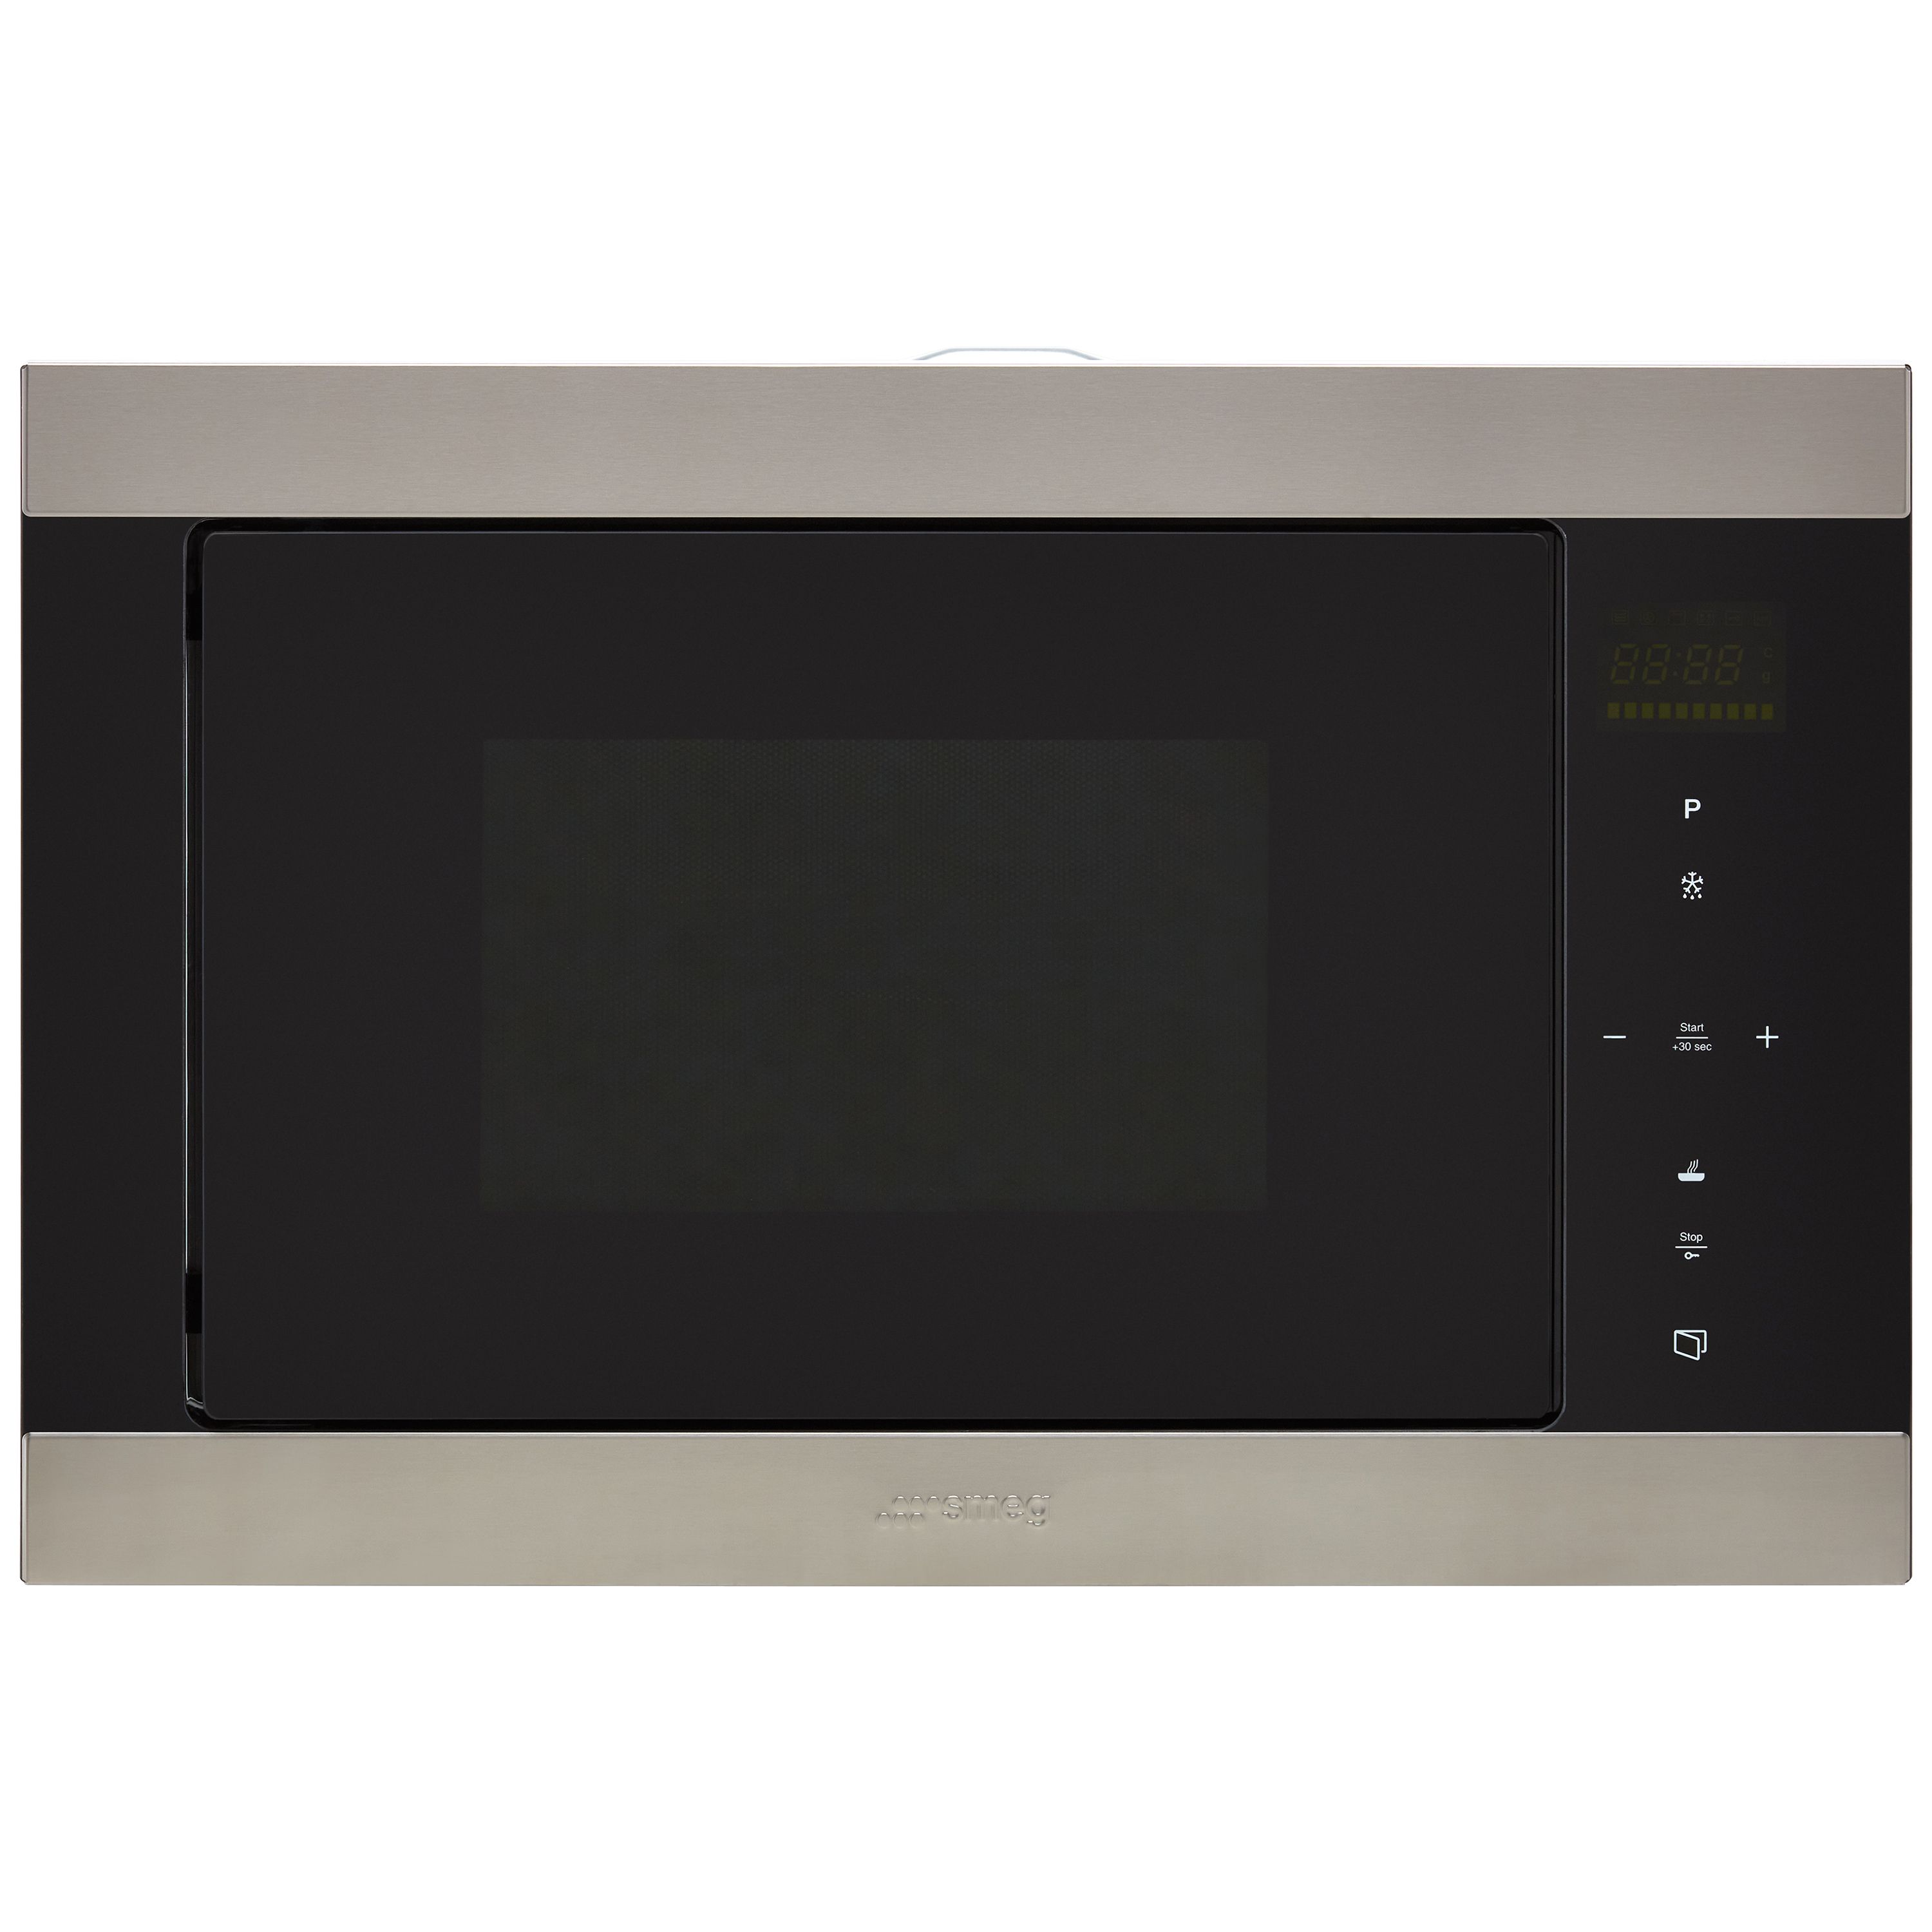 Smeg FMI325X_SS Built-in Microwave with grill - Stainless steel